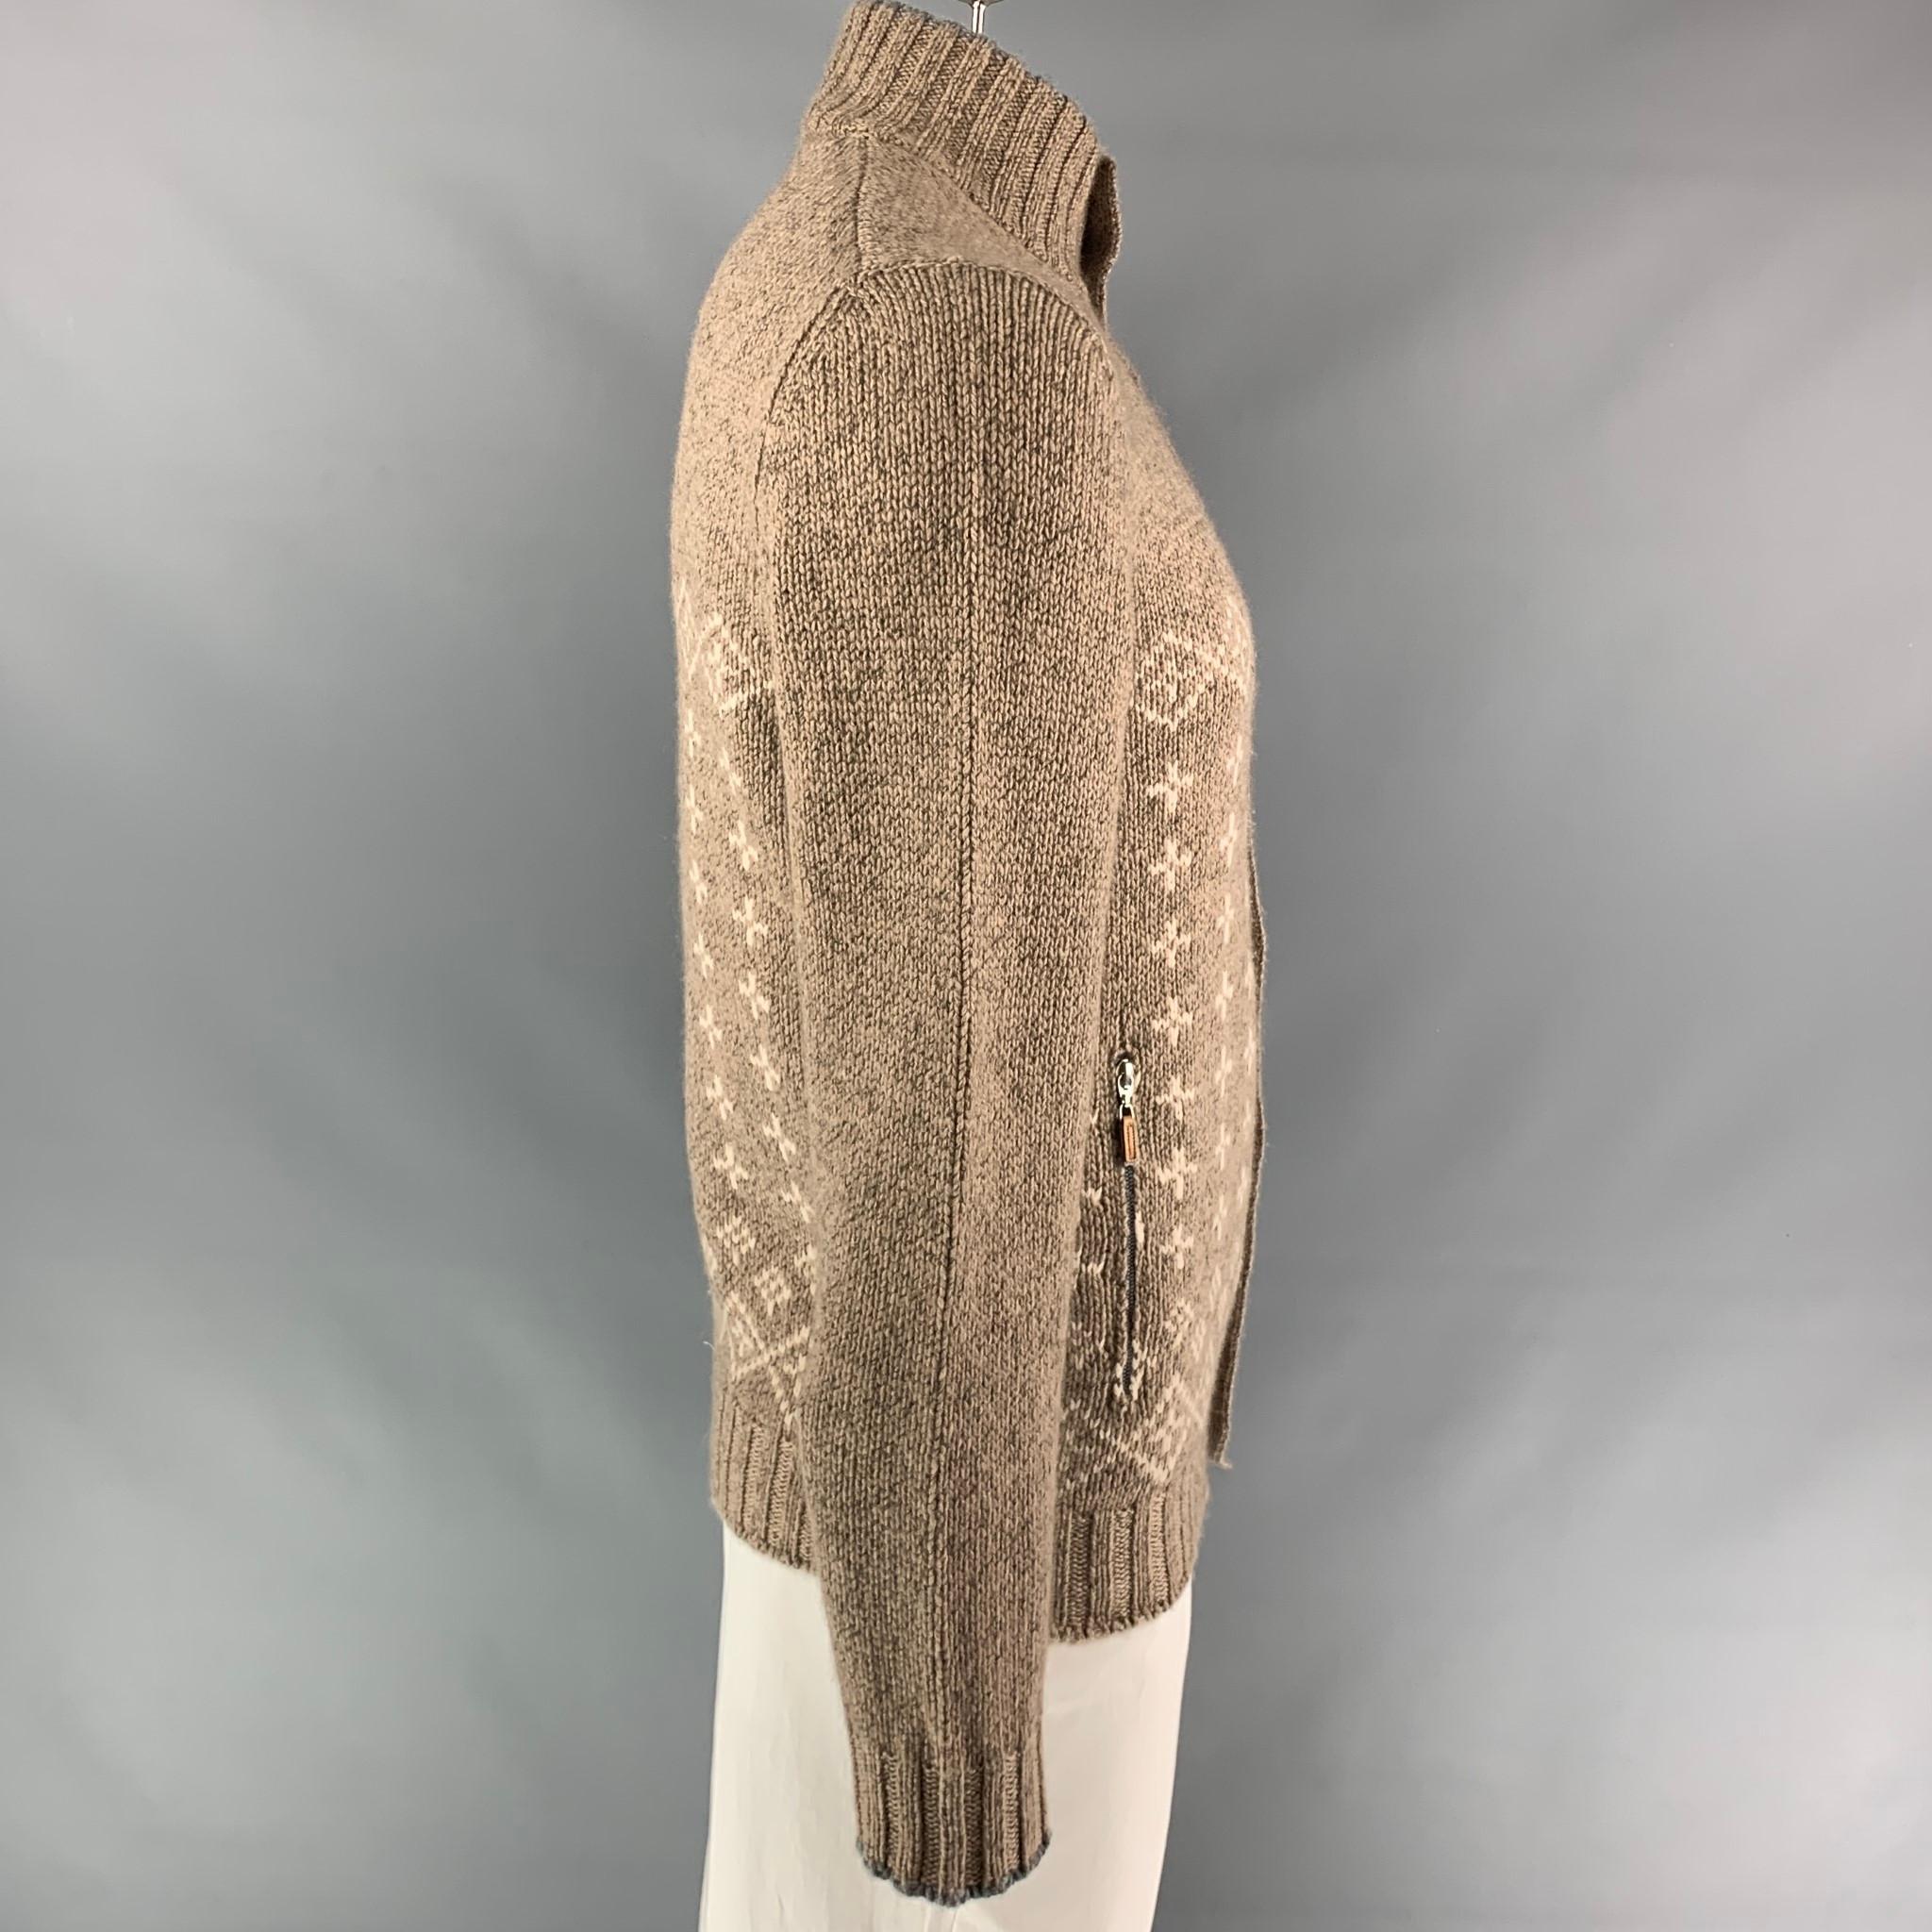 BRUNELLO CUCINELLI jacket comes in a oatmeal fairisle cashmere featuring a high collar, zipper pockets, and a buttoned closure. Made in Italy.

Very Good Pre-Owned Condition.
Marked: 52

Measurements:

Shoulder: 16 in.
Chest: 42 in.
Sleeve: 28.5